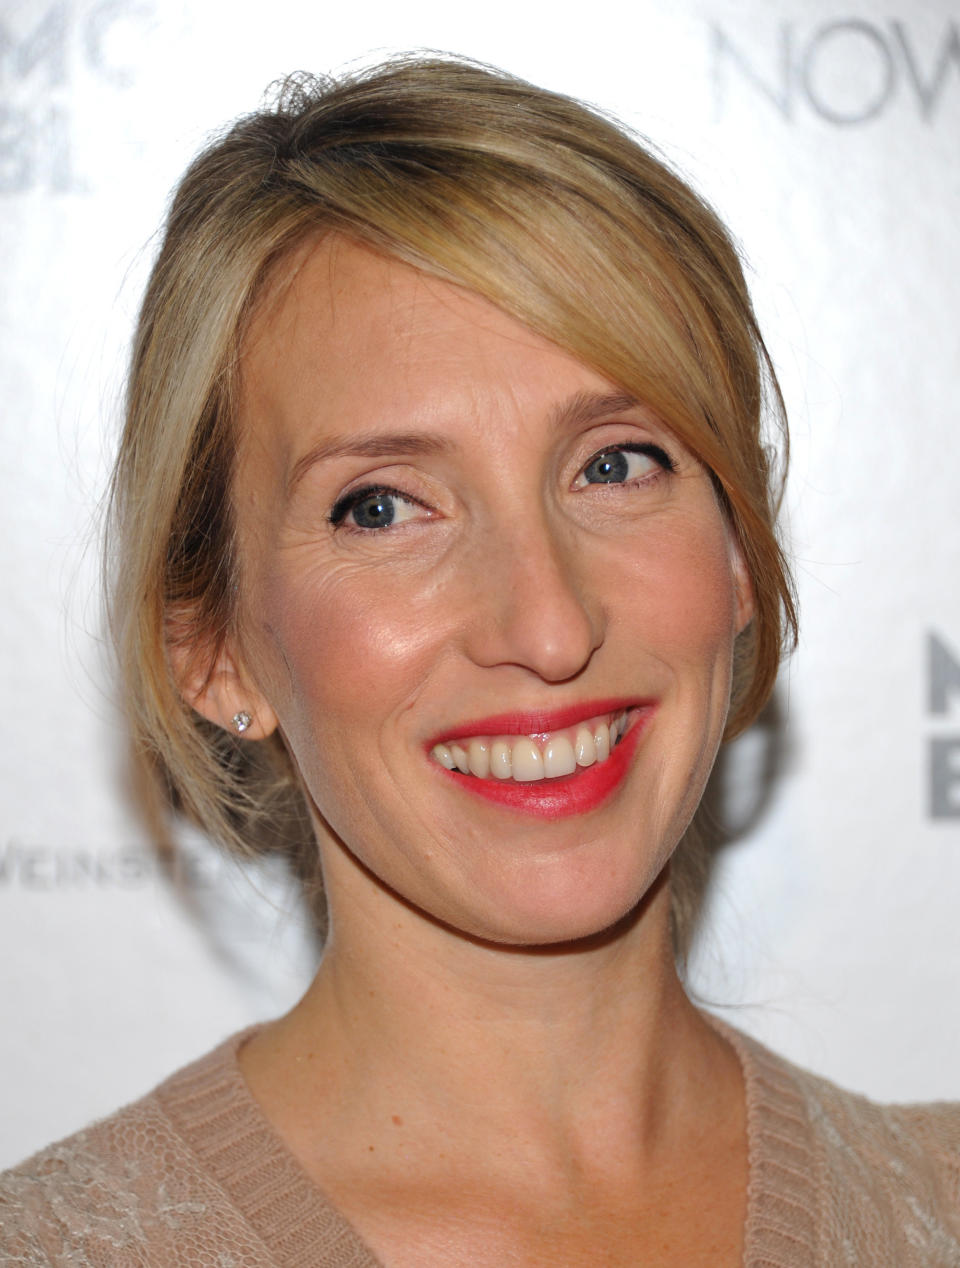 Sam Taylor-Johnson has survived cancer twice. The award-winning filmmaker was diagnosed with colon cancer in 1997, weeks after giving birth to her first daughter. In 2000, she was diagnosed with breast cancer and underwent a mastectomy and six months of chemotherapy.  In an interview with <a href="http://www.theguardian.com/artanddesign/2009/nov/28/sam-taylor-wood-interview" target="_blank">The Guardian</a>, the artist was asked if she emerged from her illness 'harder'. She responded: "I don't necessarily think harder, but I do think you're more free about where you want to be in life. Time is precious."